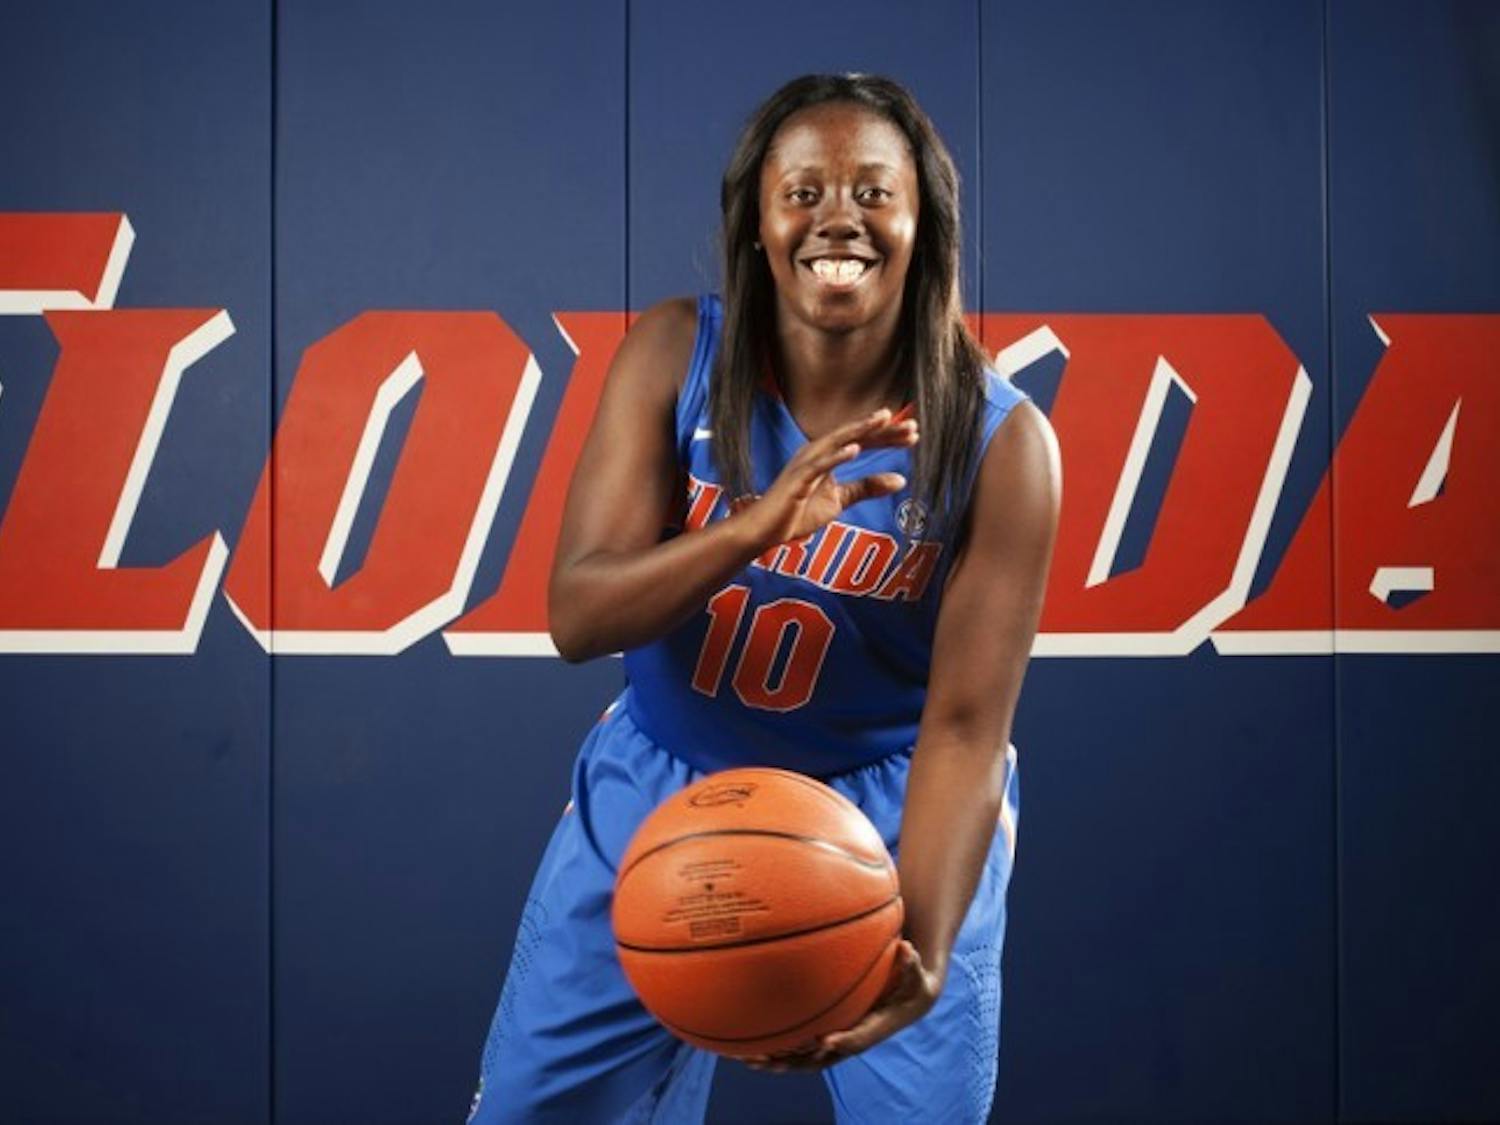 Junior guard Jaterra Bonds poses at media day on Oct. 10. Bonds scored 17 points in Florida's 84-65 win against Georgia State on Sunday in the Stephen C. O'Connell Center.